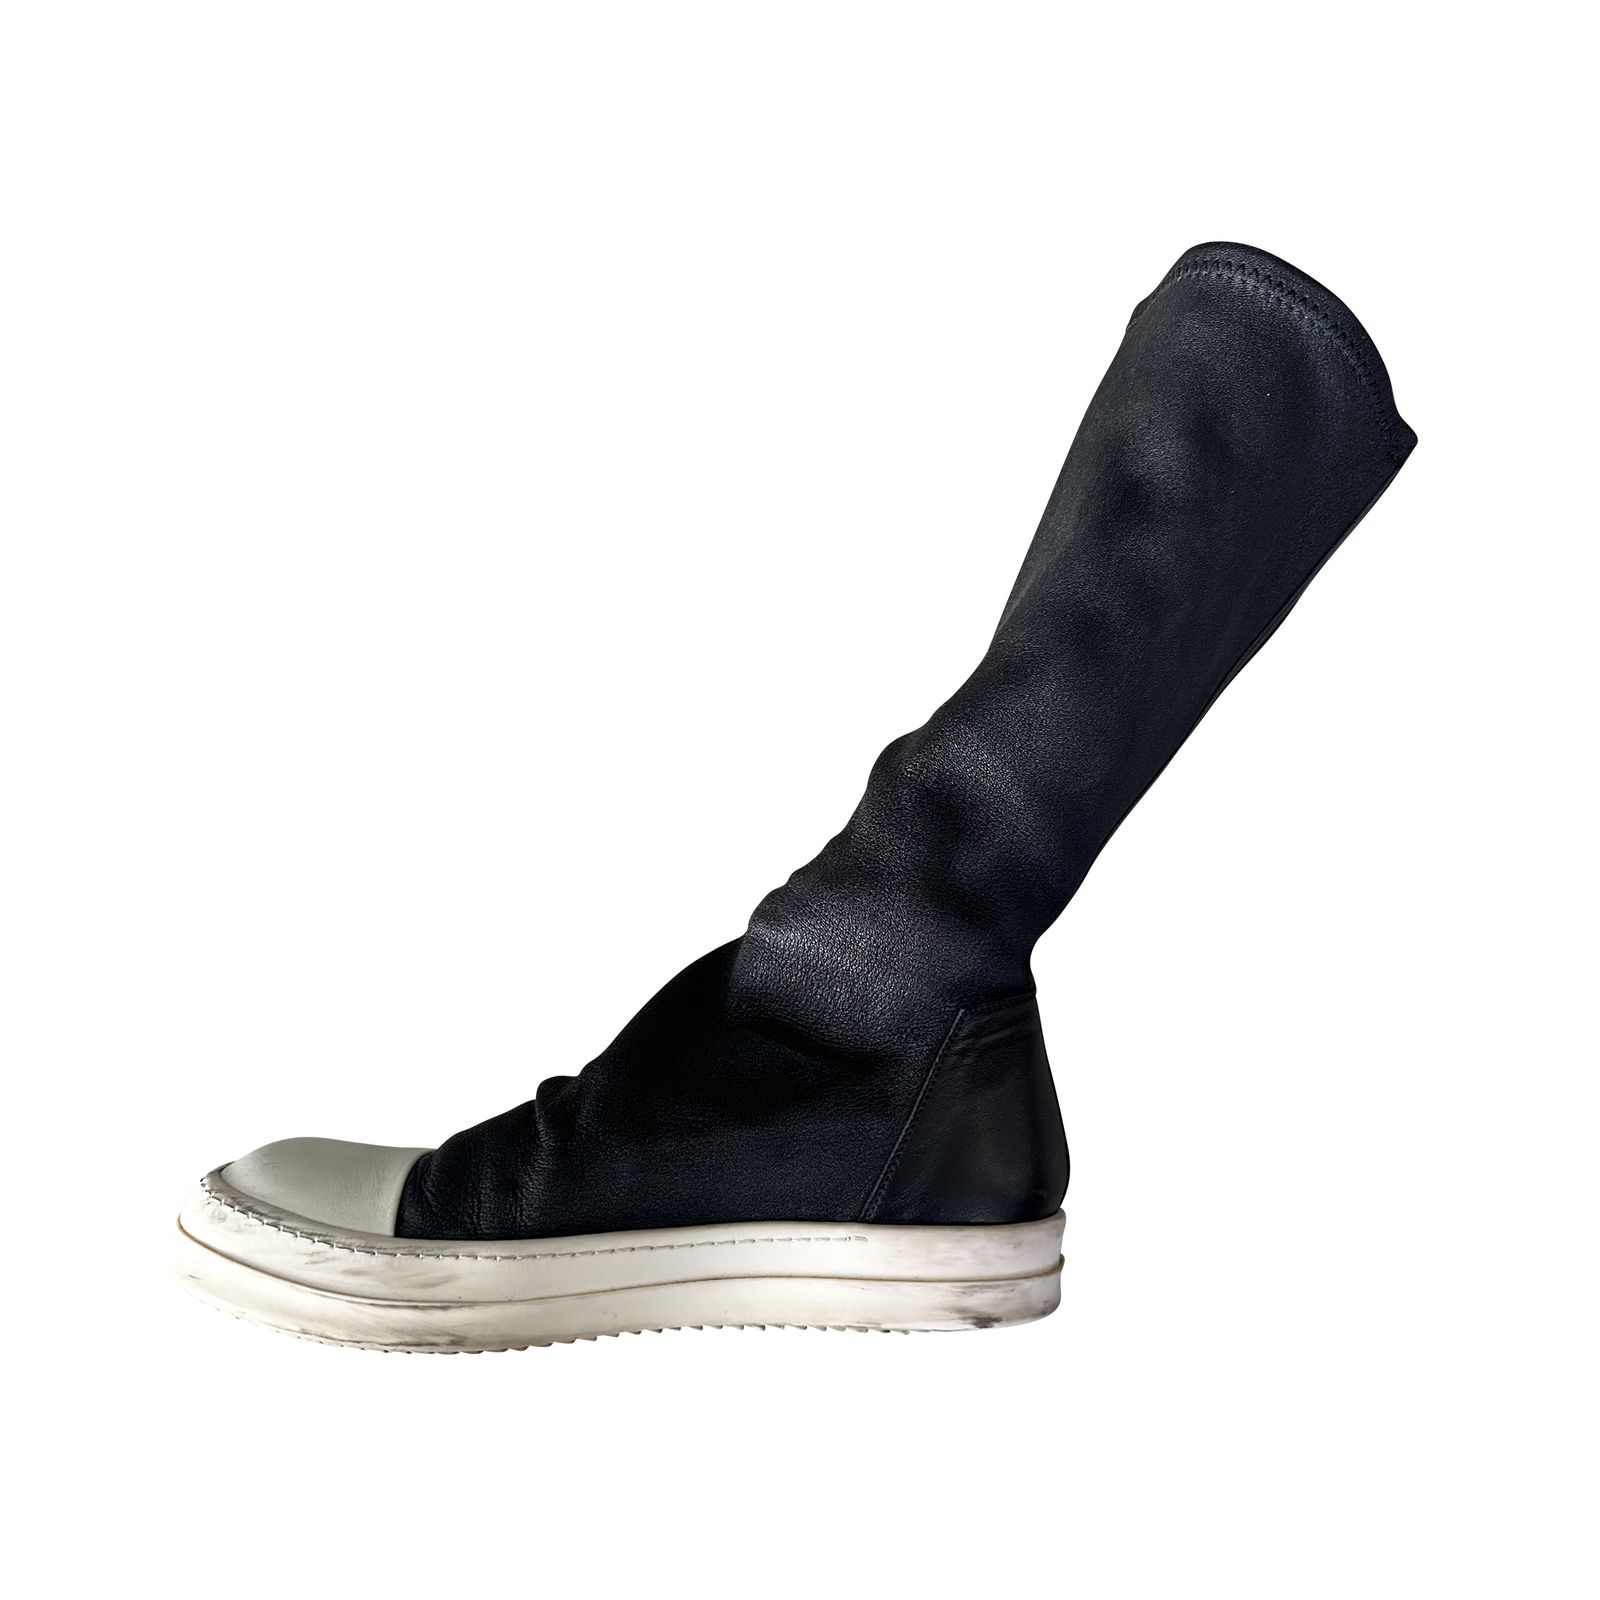 Rick Owens Sock Ramone High-top Sneakers Size US 7 / EU 40 - 2 Preview